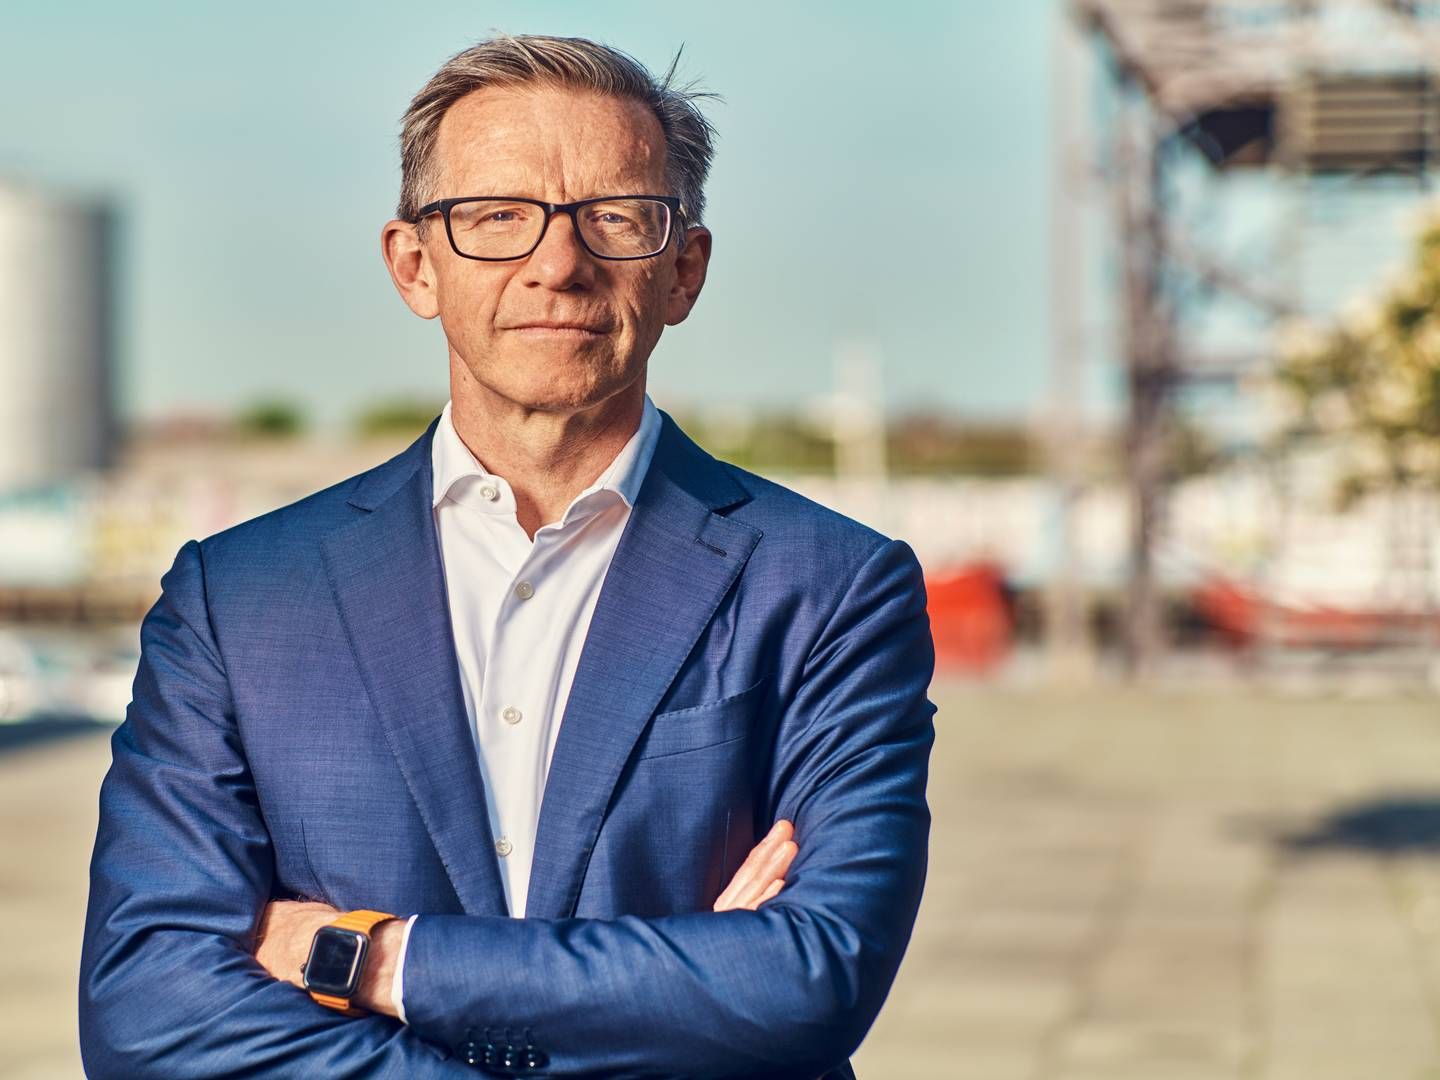 Christian Hyldahl, Managing Director, Head of Northern Europe and Senior Advisor to BlackRock’s Pensions and Retirement business in Europe. | Photo: PR / BlackRock